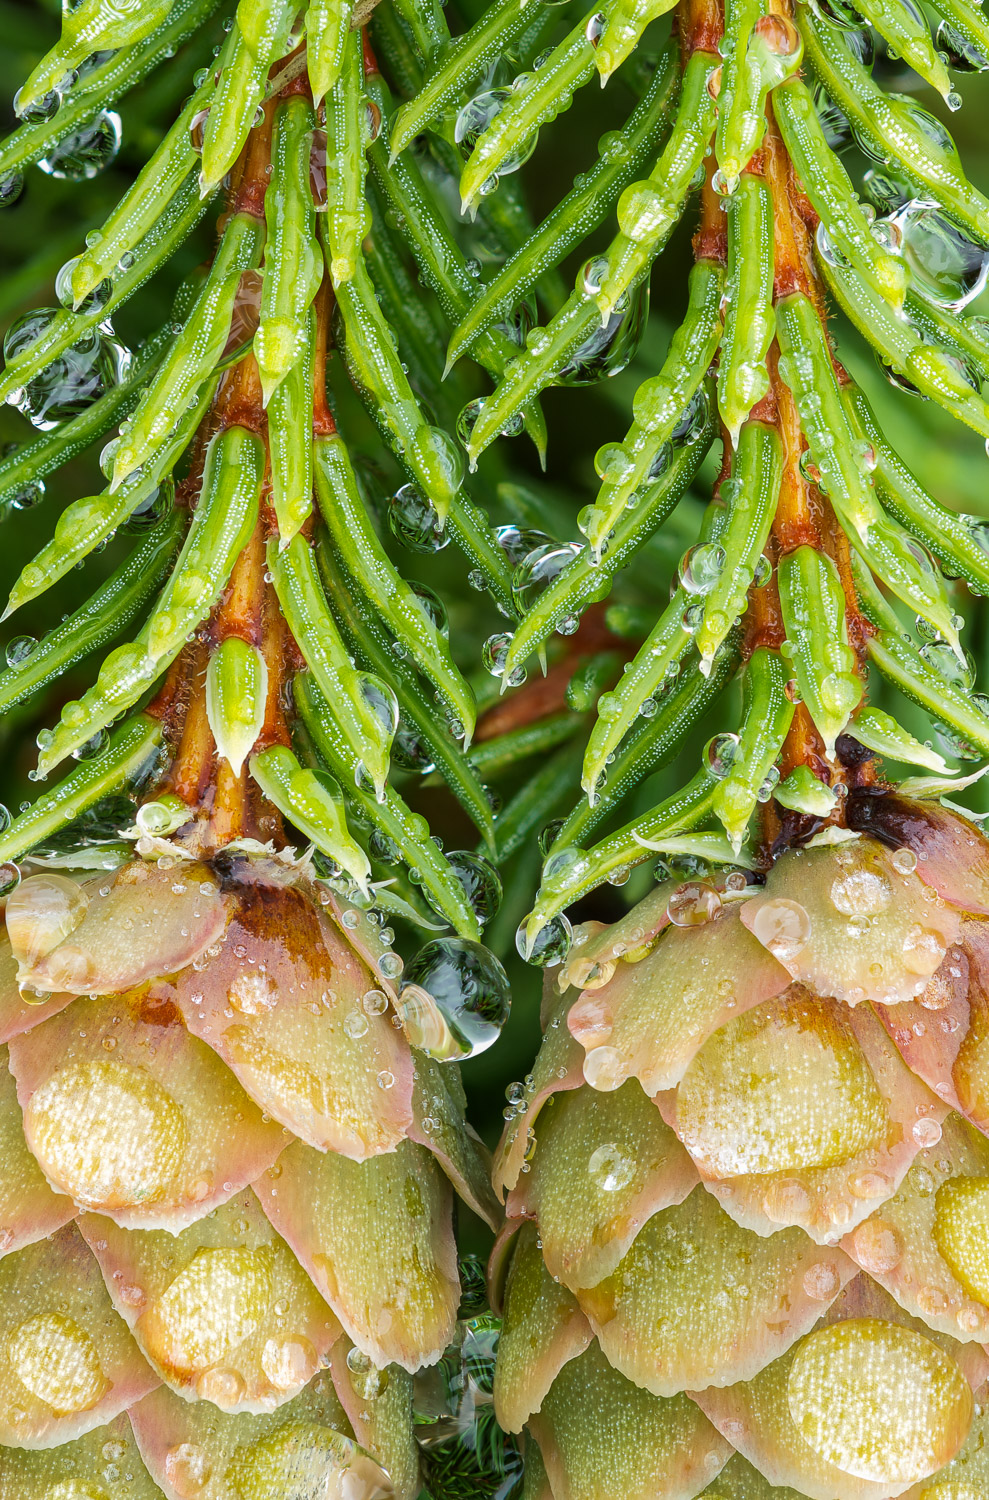 Raindrops adorn needles and cones of a dwarf Norway Spruce (Picea abies 'Pusch').  This shrub is a cultivar which originated...